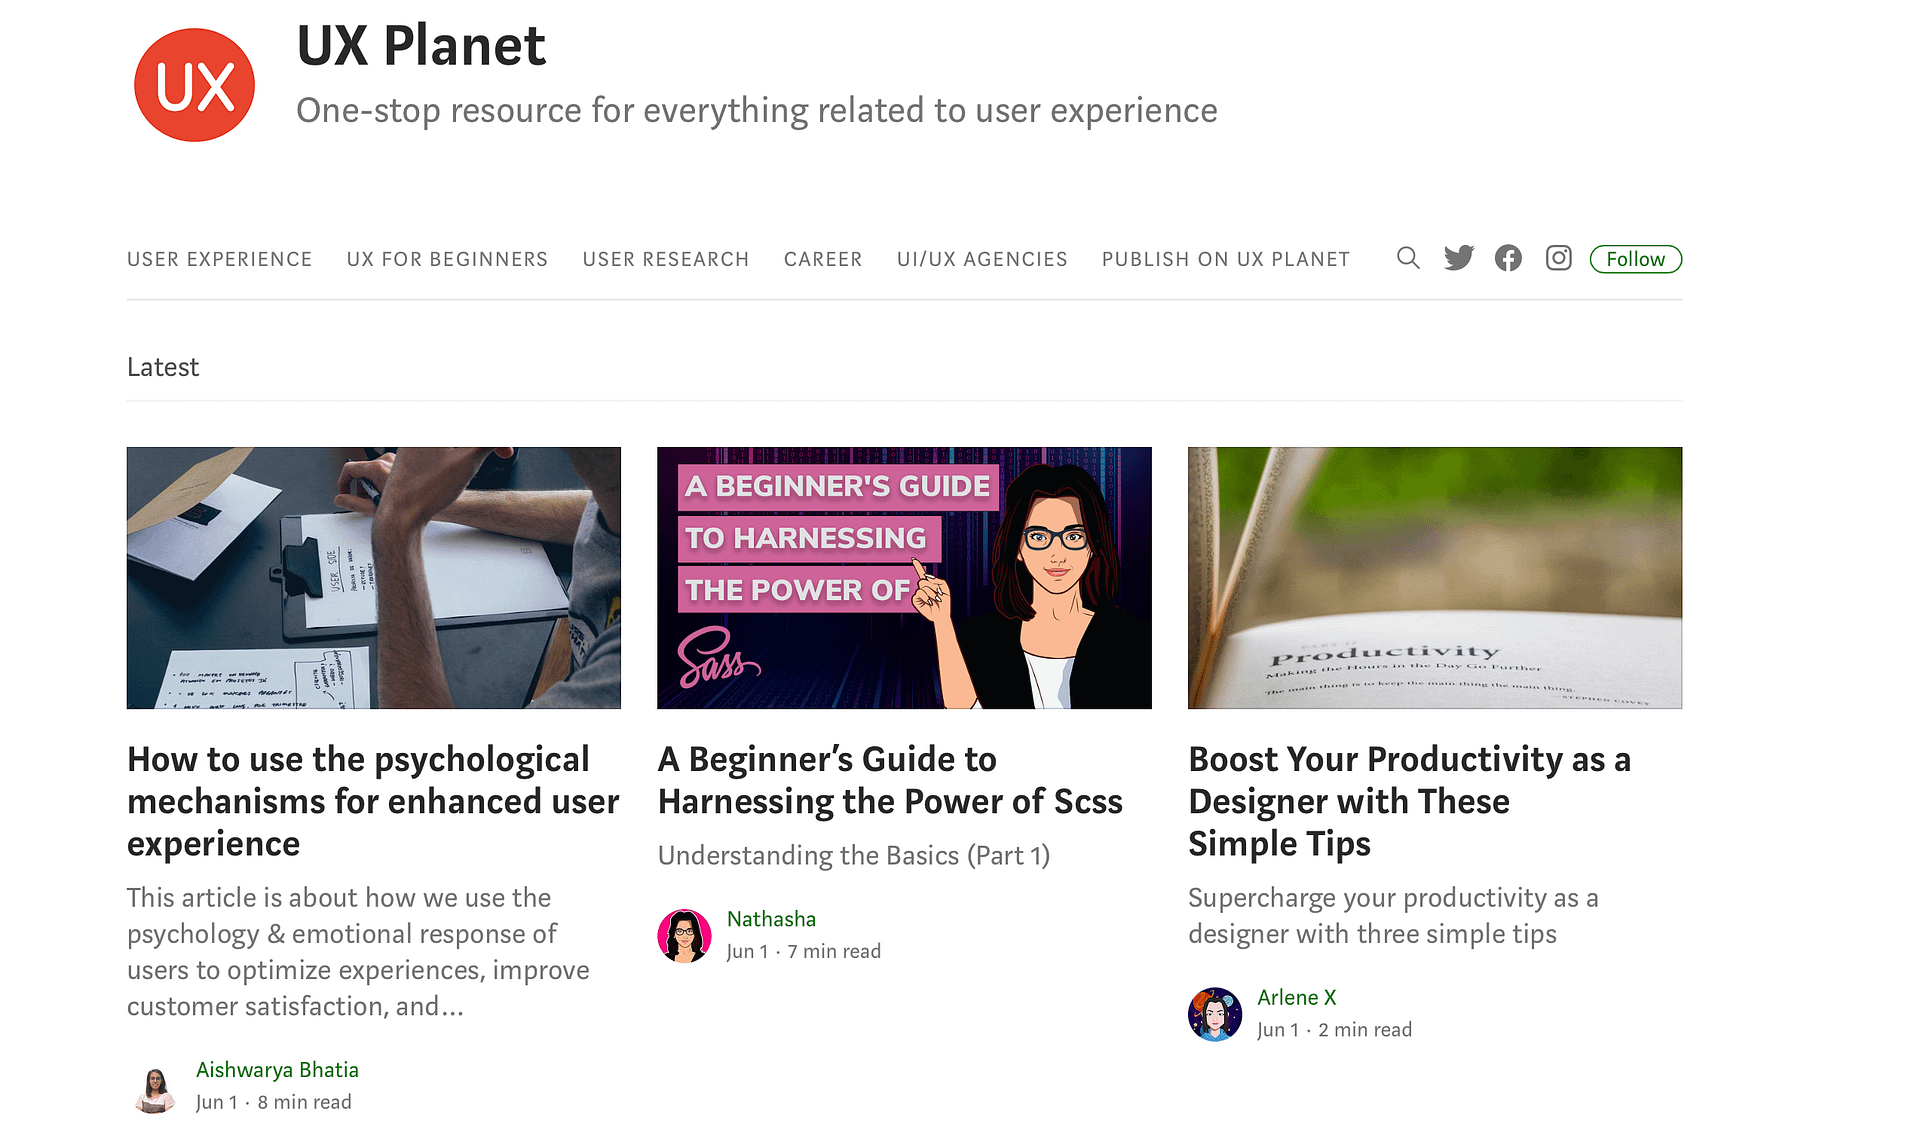 UX Planet is a great example of an UX blog.